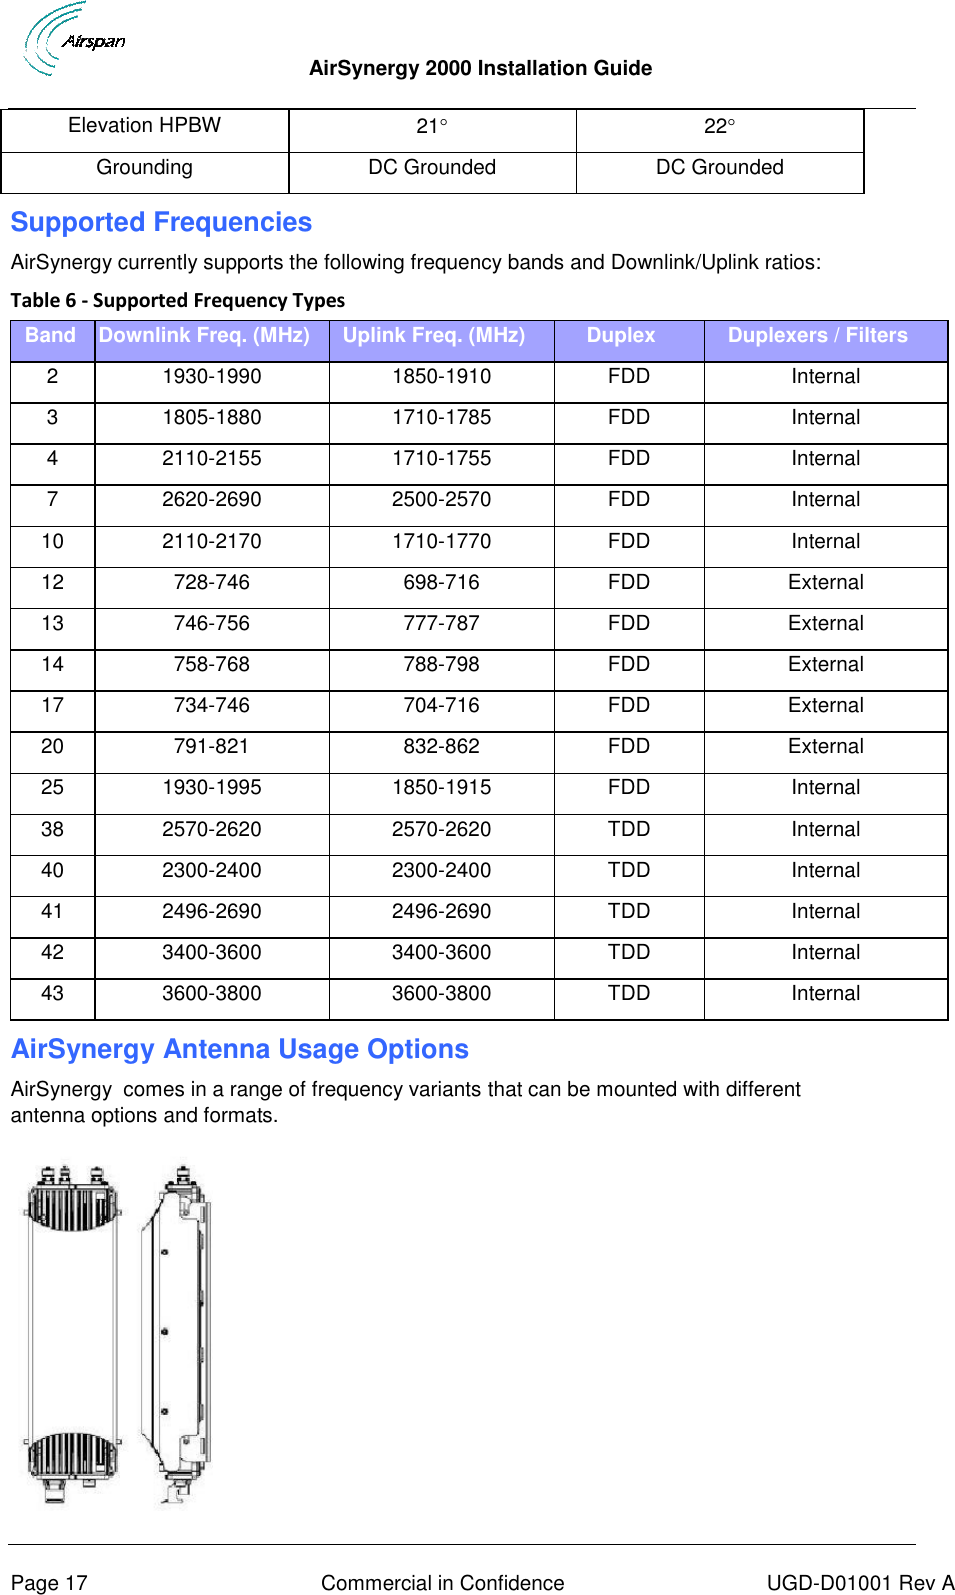  AirSynergy 2000 Installation Guide     Page 17  Commercial in Confidence  UGD-D01001 Rev A Elevation HPBW 21 22 Grounding DC Grounded DC Grounded Supported Frequencies AirSynergy currently supports the following frequency bands and Downlink/Uplink ratios: Table 6 - Supported Frequency Types Band Downlink Freq. (MHz) Uplink Freq. (MHz) Duplex Duplexers / Filters 2 1930-1990 1850-1910 FDD Internal 3 1805-1880 1710-1785 FDD Internal 4 2110-2155 1710-1755 FDD Internal 7 2620-2690 2500-2570 FDD Internal 10 2110-2170 1710-1770 FDD Internal 12 728-746 698-716 FDD External 13 746-756 777-787 FDD External 14 758-768 788-798 FDD External 17 734-746 704-716 FDD External 20 791-821 832-862 FDD External 25 1930-1995 1850-1915 FDD Internal 38 2570-2620 2570-2620 TDD Internal 40 2300-2400 2300-2400 TDD Internal 41 2496-2690 2496-2690 TDD Internal 42 3400-3600 3400-3600 TDD Internal 43 3600-3800 3600-3800 TDD Internal AirSynergy Antenna Usage Options AirSynergy  comes in a range of frequency variants that can be mounted with different antenna options and formats.  